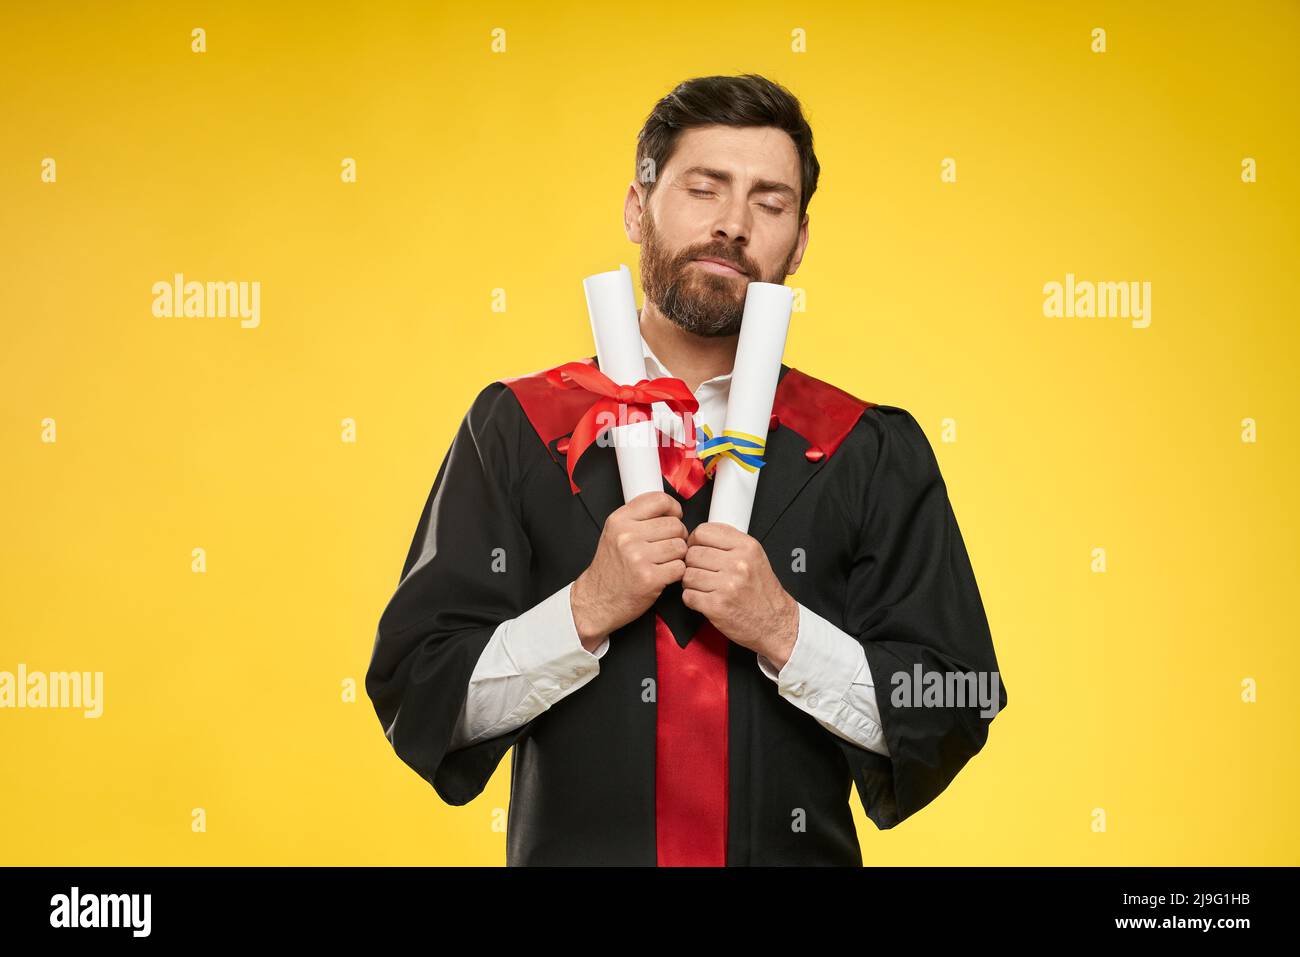 Front view of bachelor, master standing, holding two diplomas. Student wearing graduate gown and mortarboard, happy, glad with closed eyes. Isolated on yellow studio background. Stock Photo